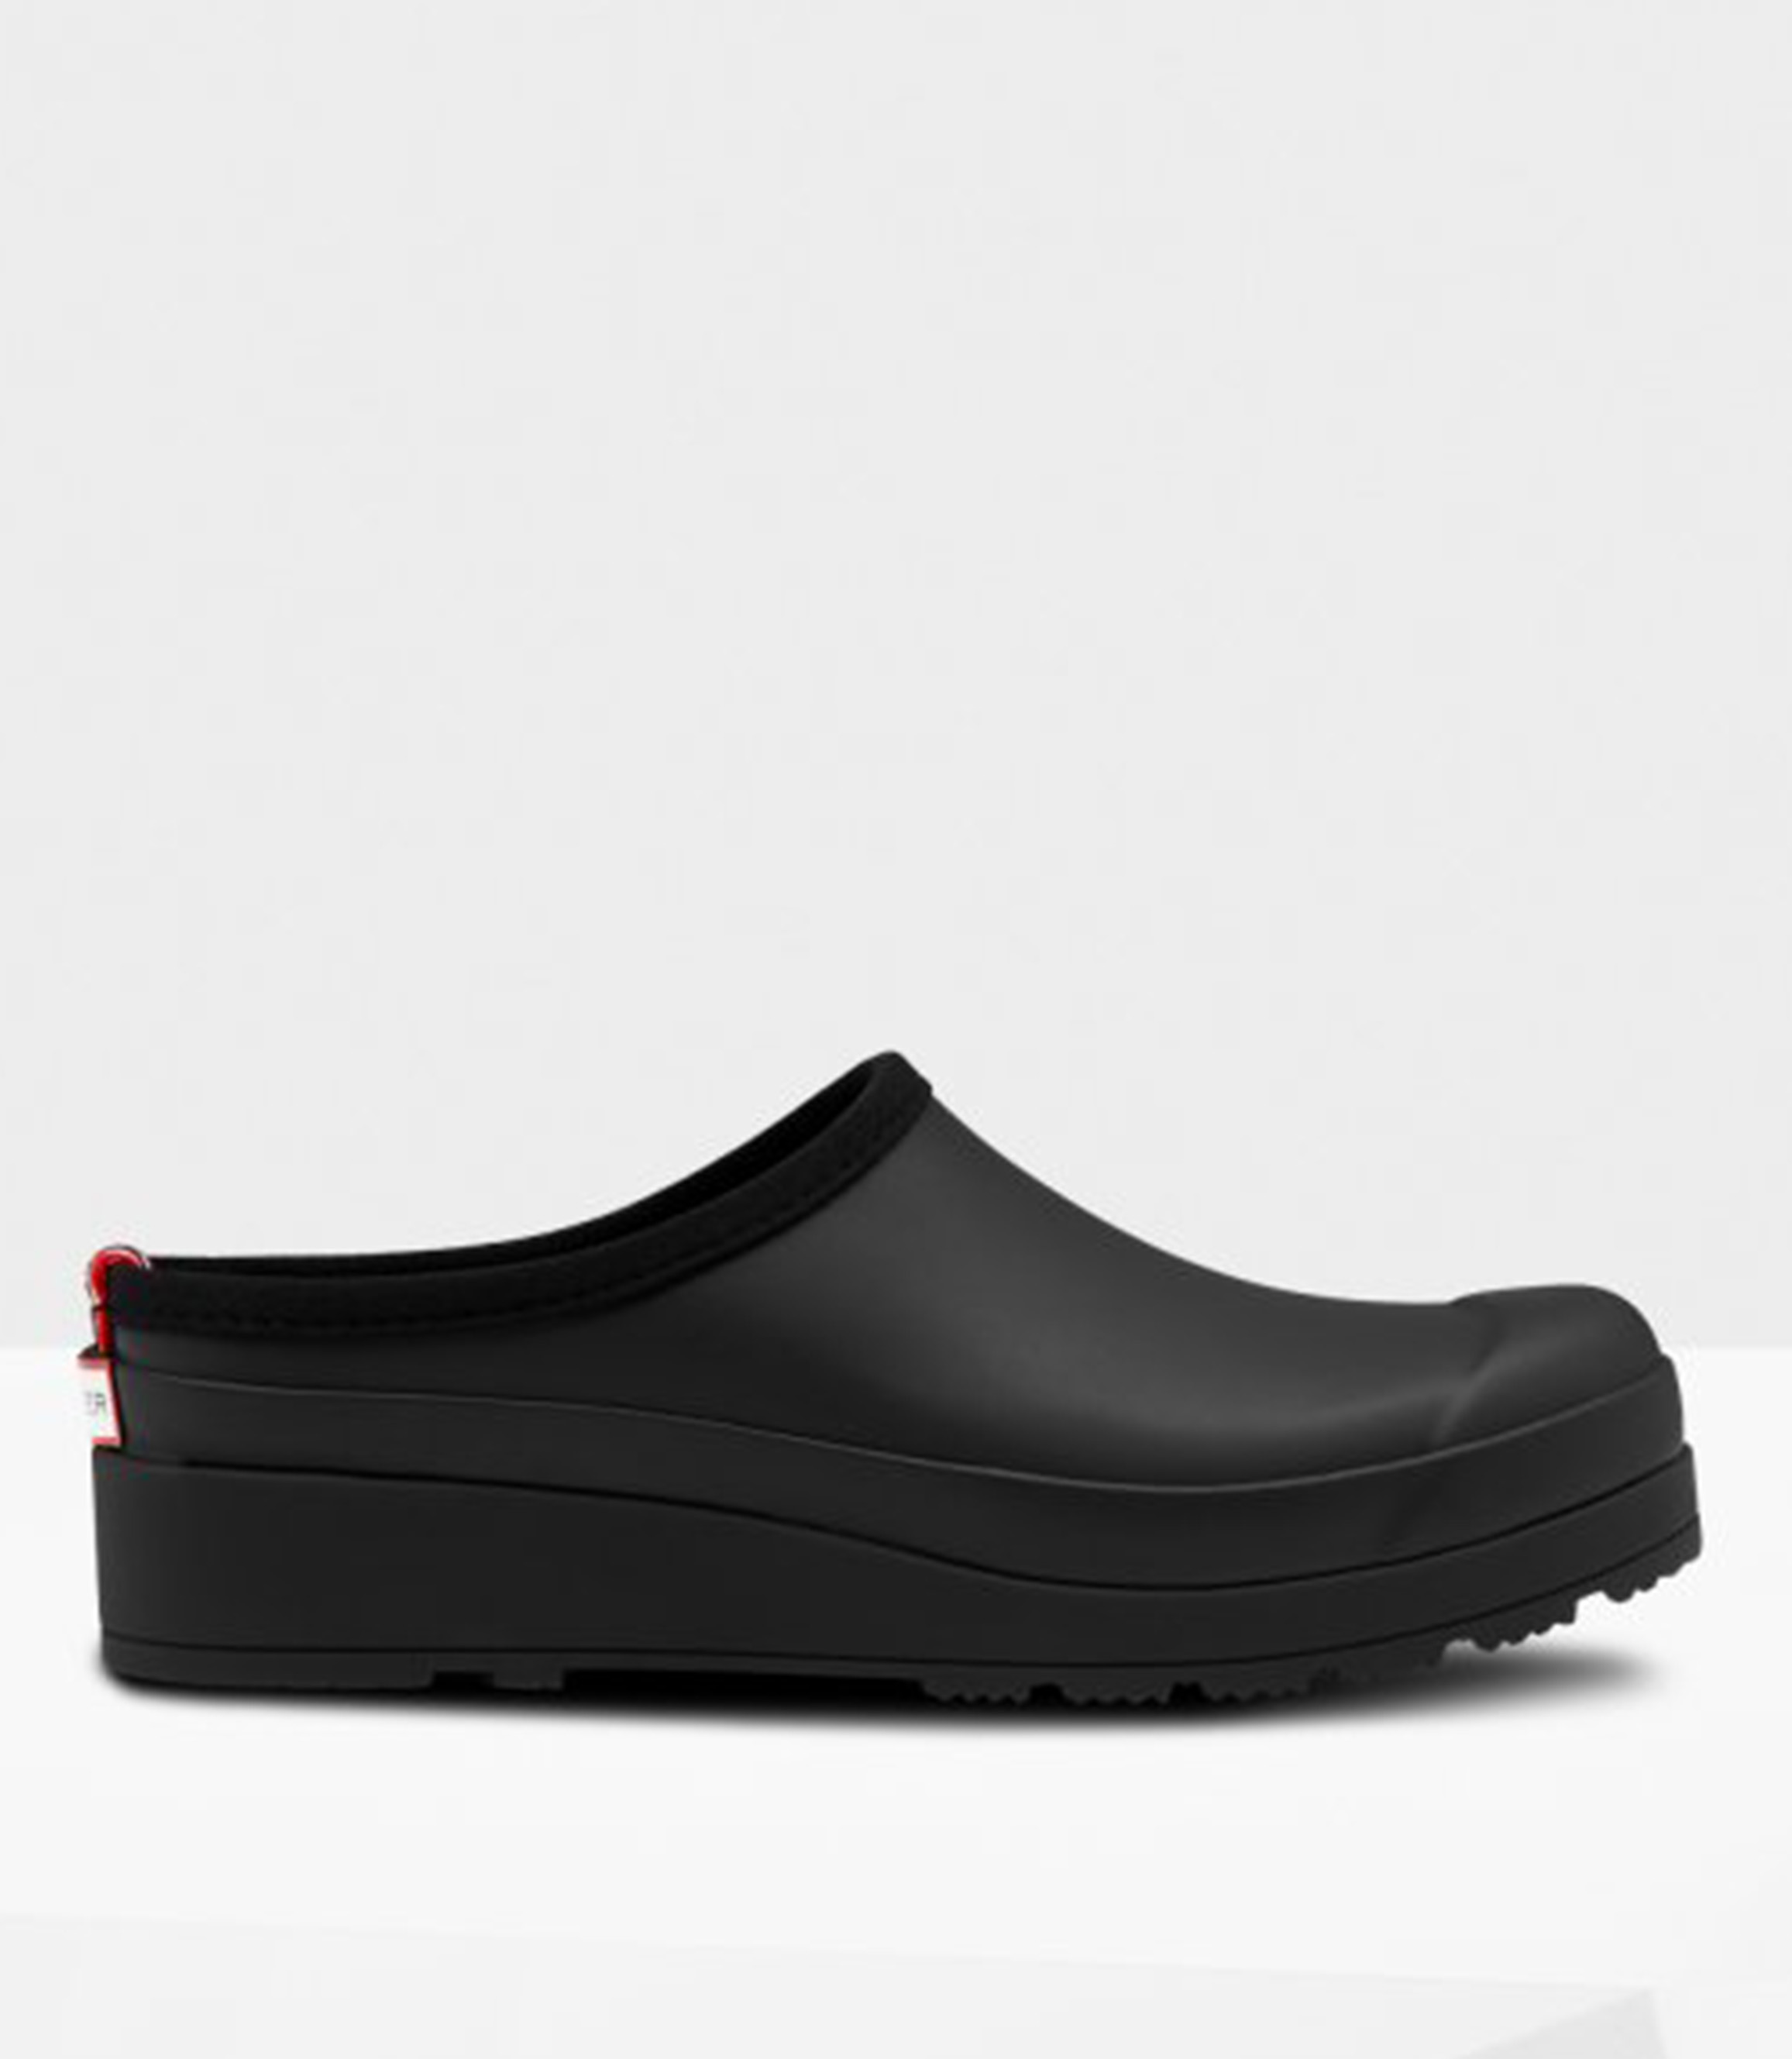 HUNTER BLACK PLAY CLOG | Rosella - Style inspired by elegance